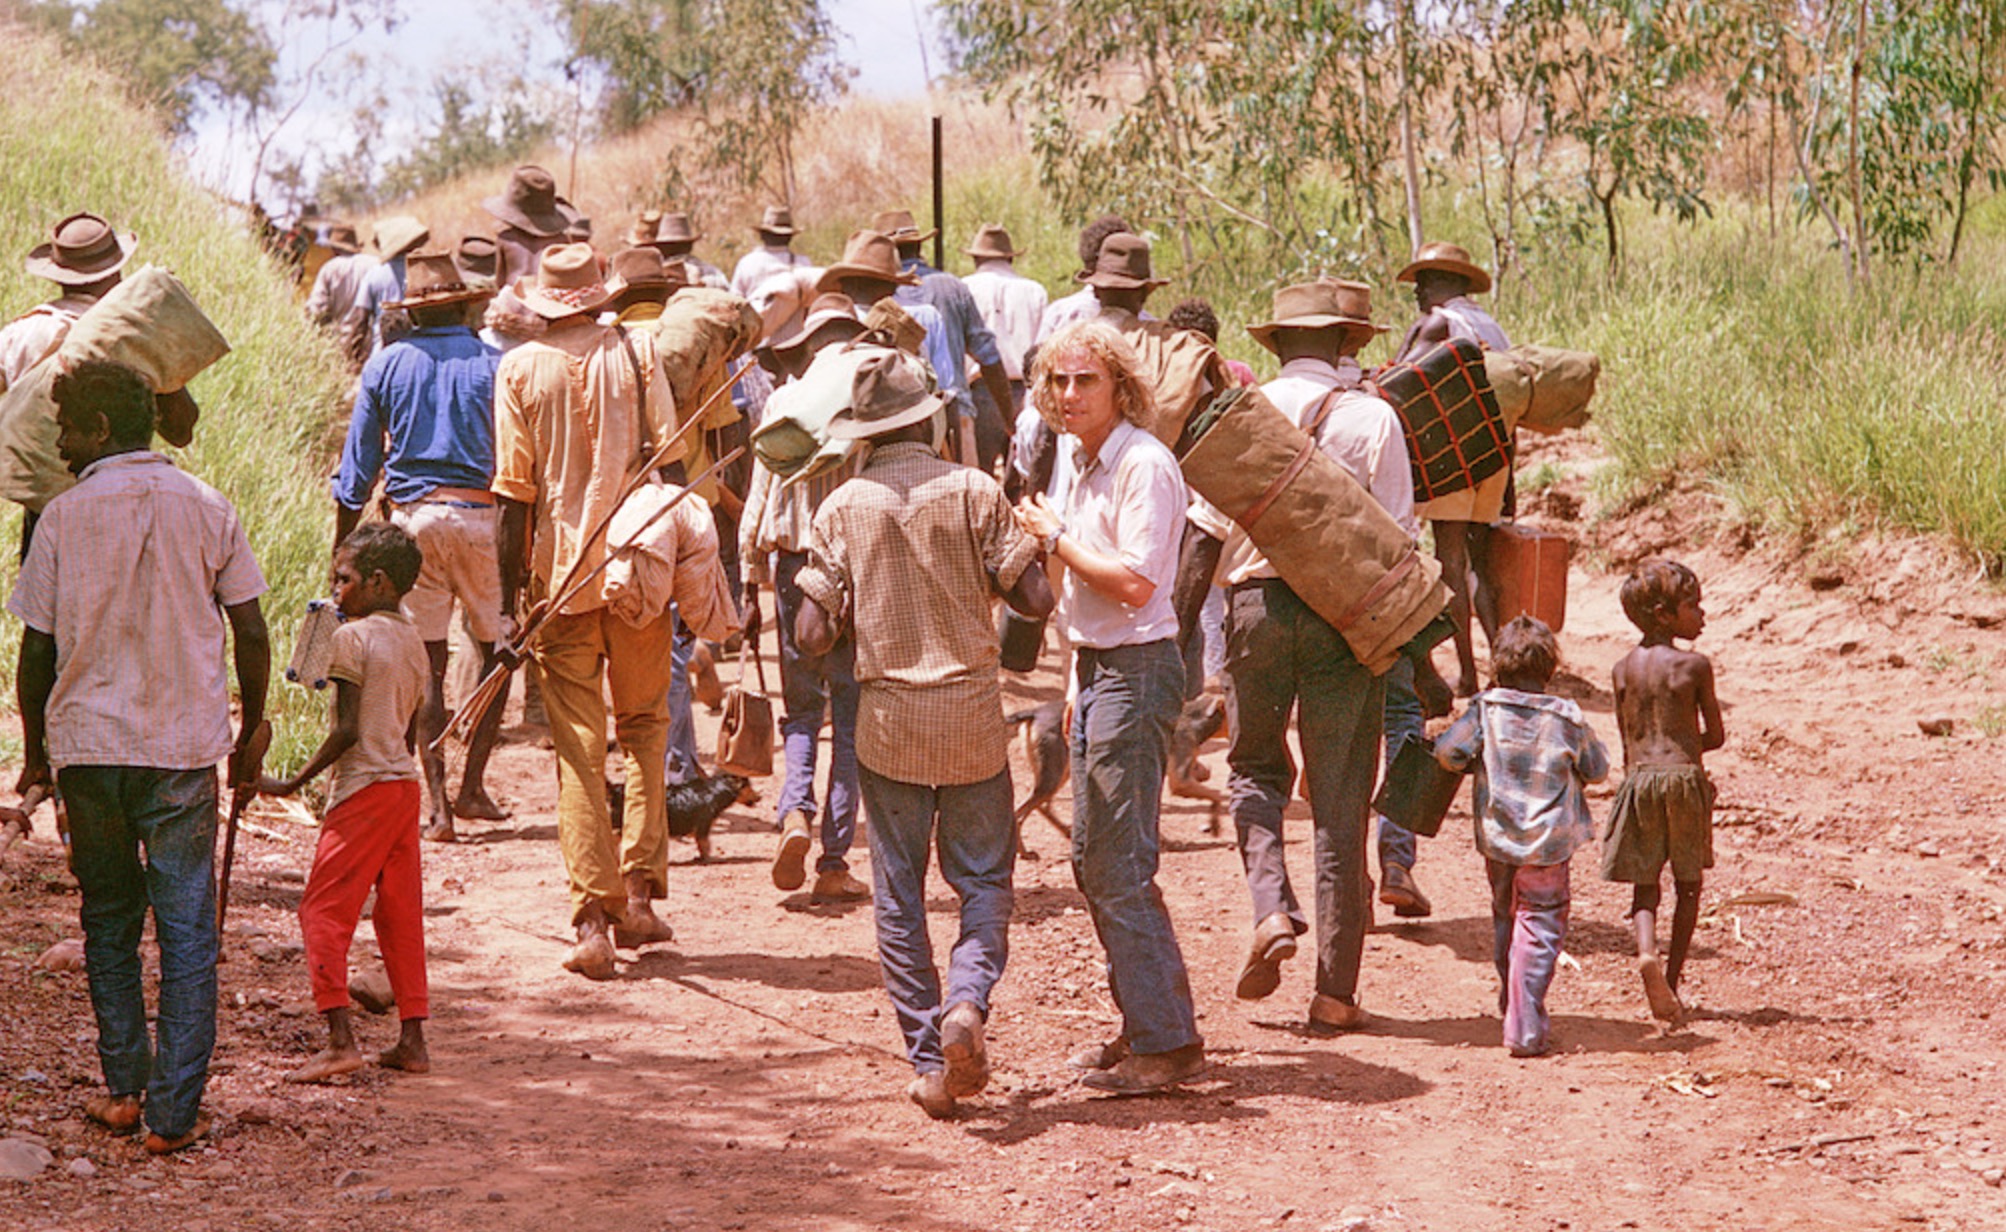   The filmmaker John Goldschmidt and the re-enactment of the Gurindji Walkout from the Vestey's cattle station at Wave Hill in 1966   image - ABC 